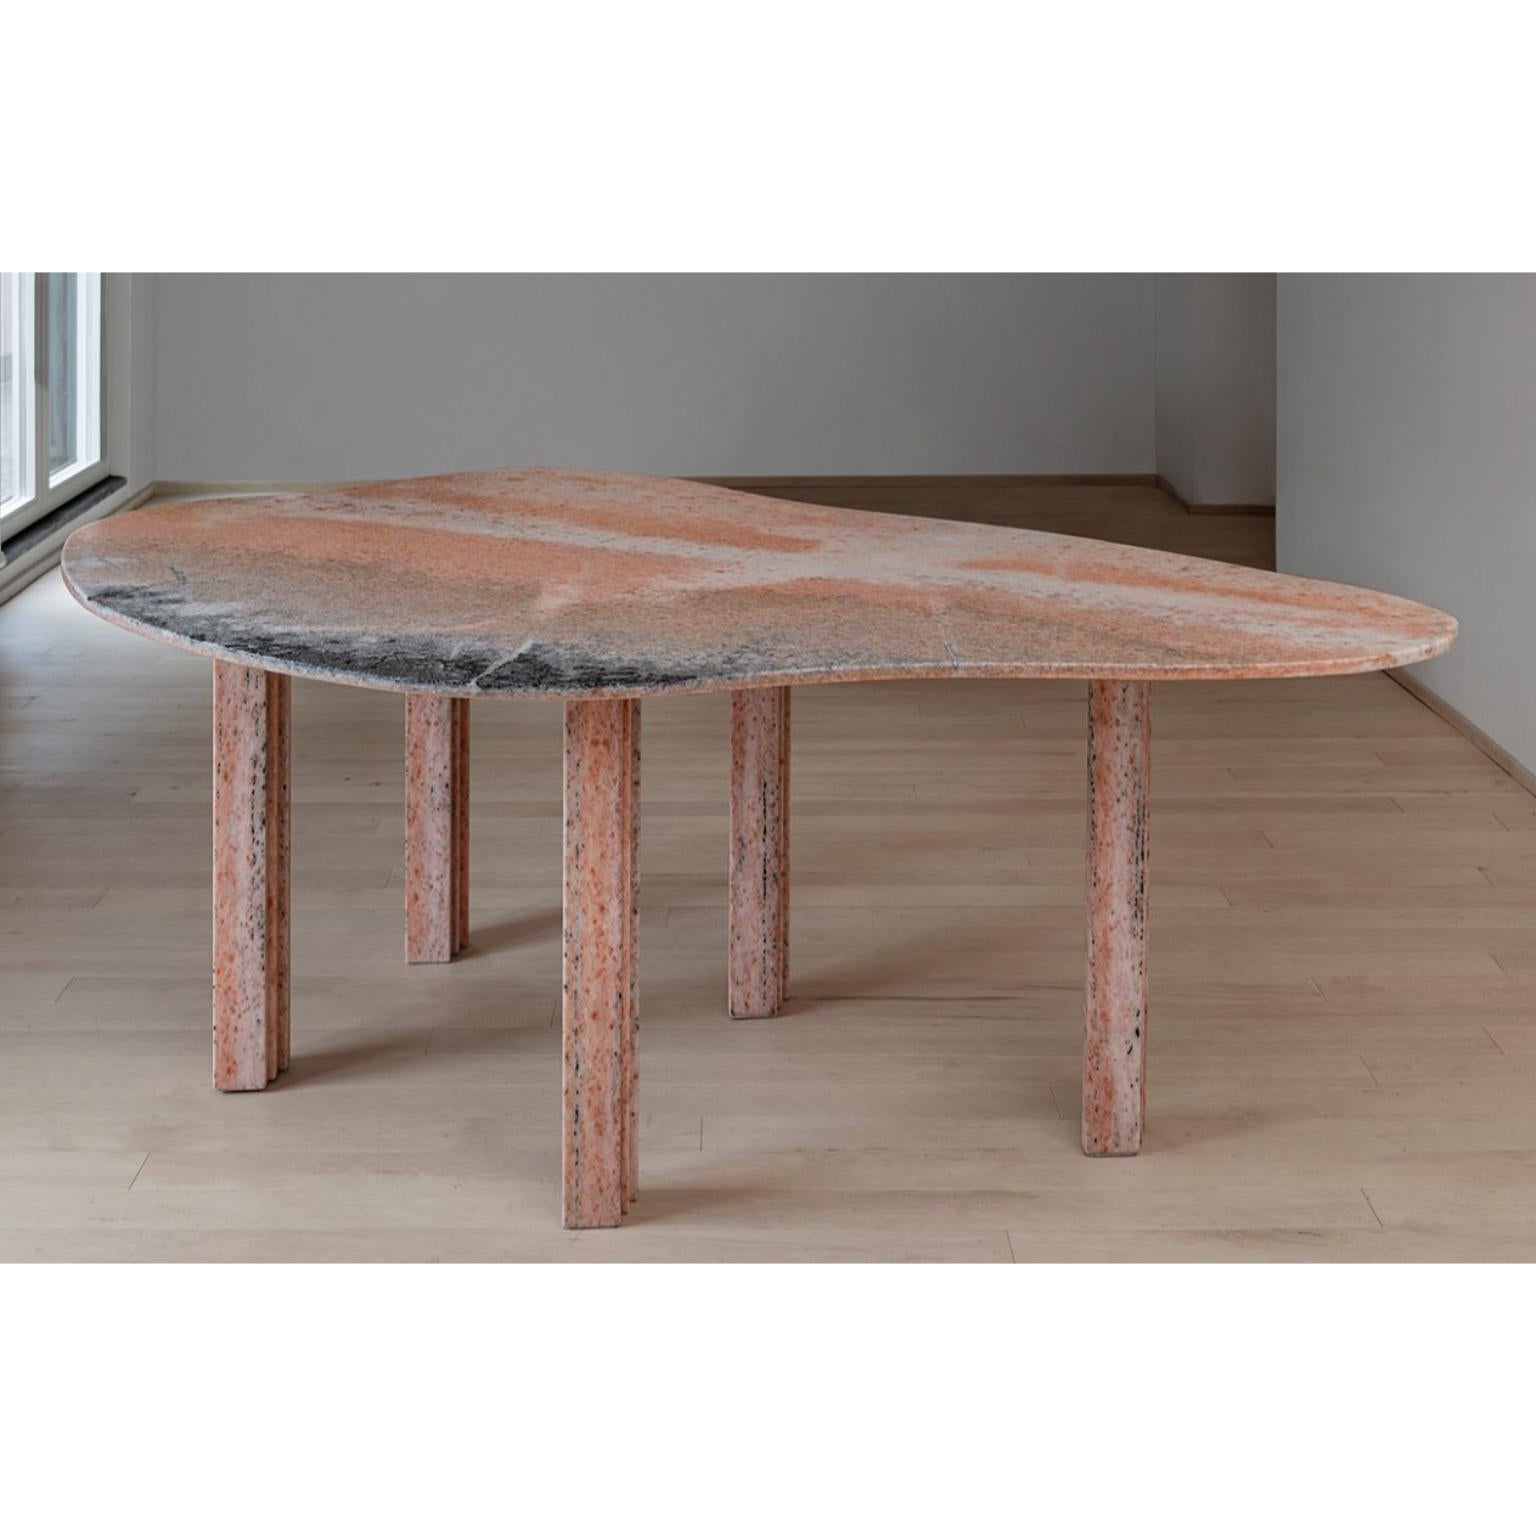 Pear marble coffee table by Lorenzo Bini
Dimensions: L 102 x W 62.5 x H 37 cm
Materials: Marble
Variations of Material avaliable.

About Lorenzo Bini:

Born in 1971, educated in Milan and Oslo, Lorenzo graduated in 1998 from Politecnico di